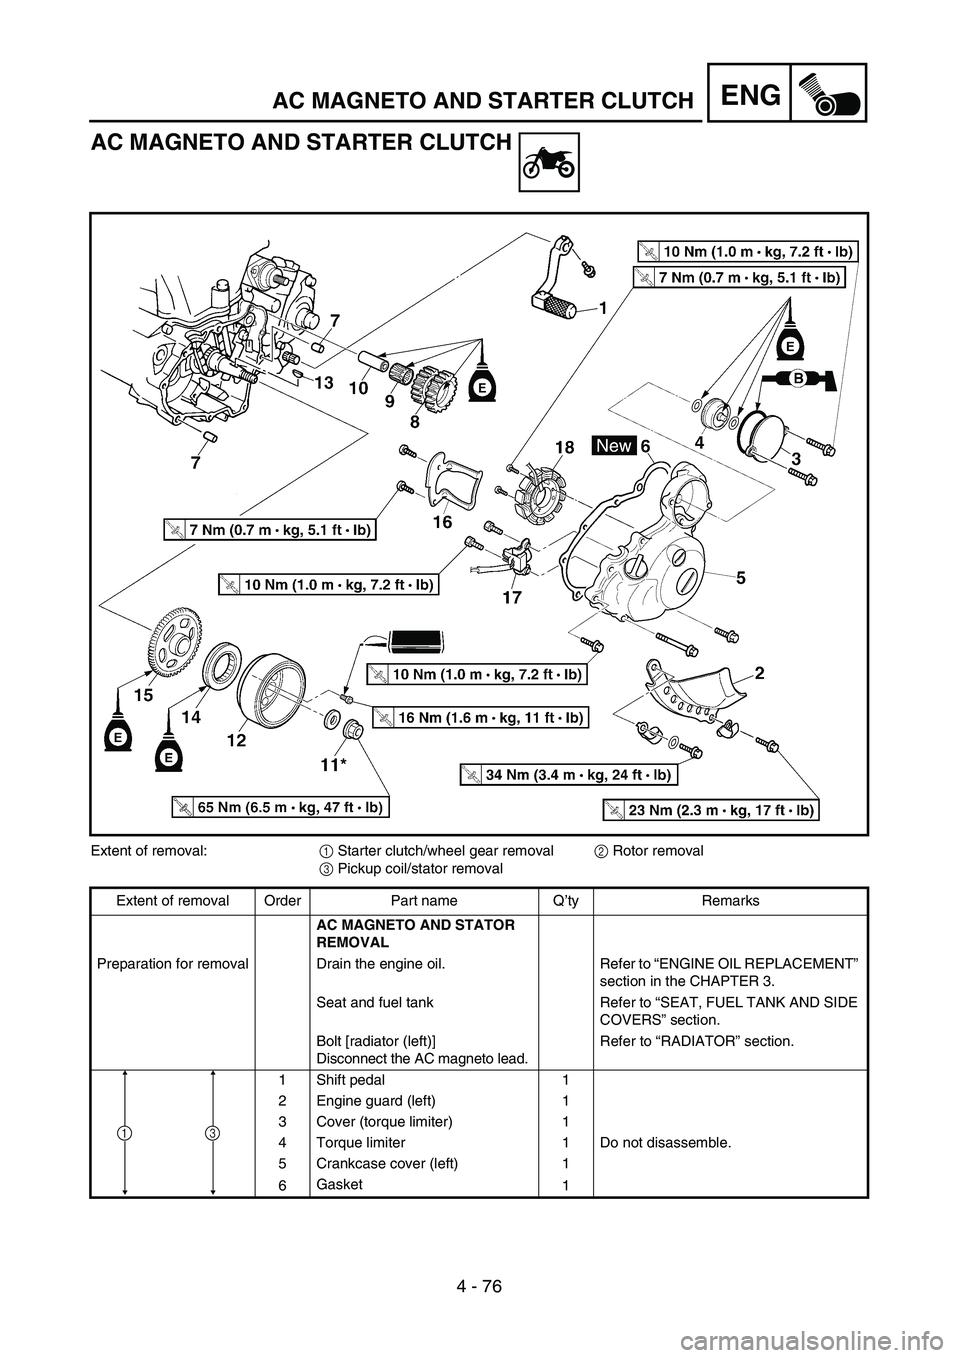 YAMAHA WR 450F 2004  Manuale de Empleo (in Spanish) 4 - 76
ENGAC MAGNETO AND STARTER CLUTCH
AC MAGNETO AND STARTER CLUTCH
Extent of removal:1 Starter clutch/wheel gear removal2 Rotor removal
3 Pickup coil/stator removal
Extent of removal Order Part nam